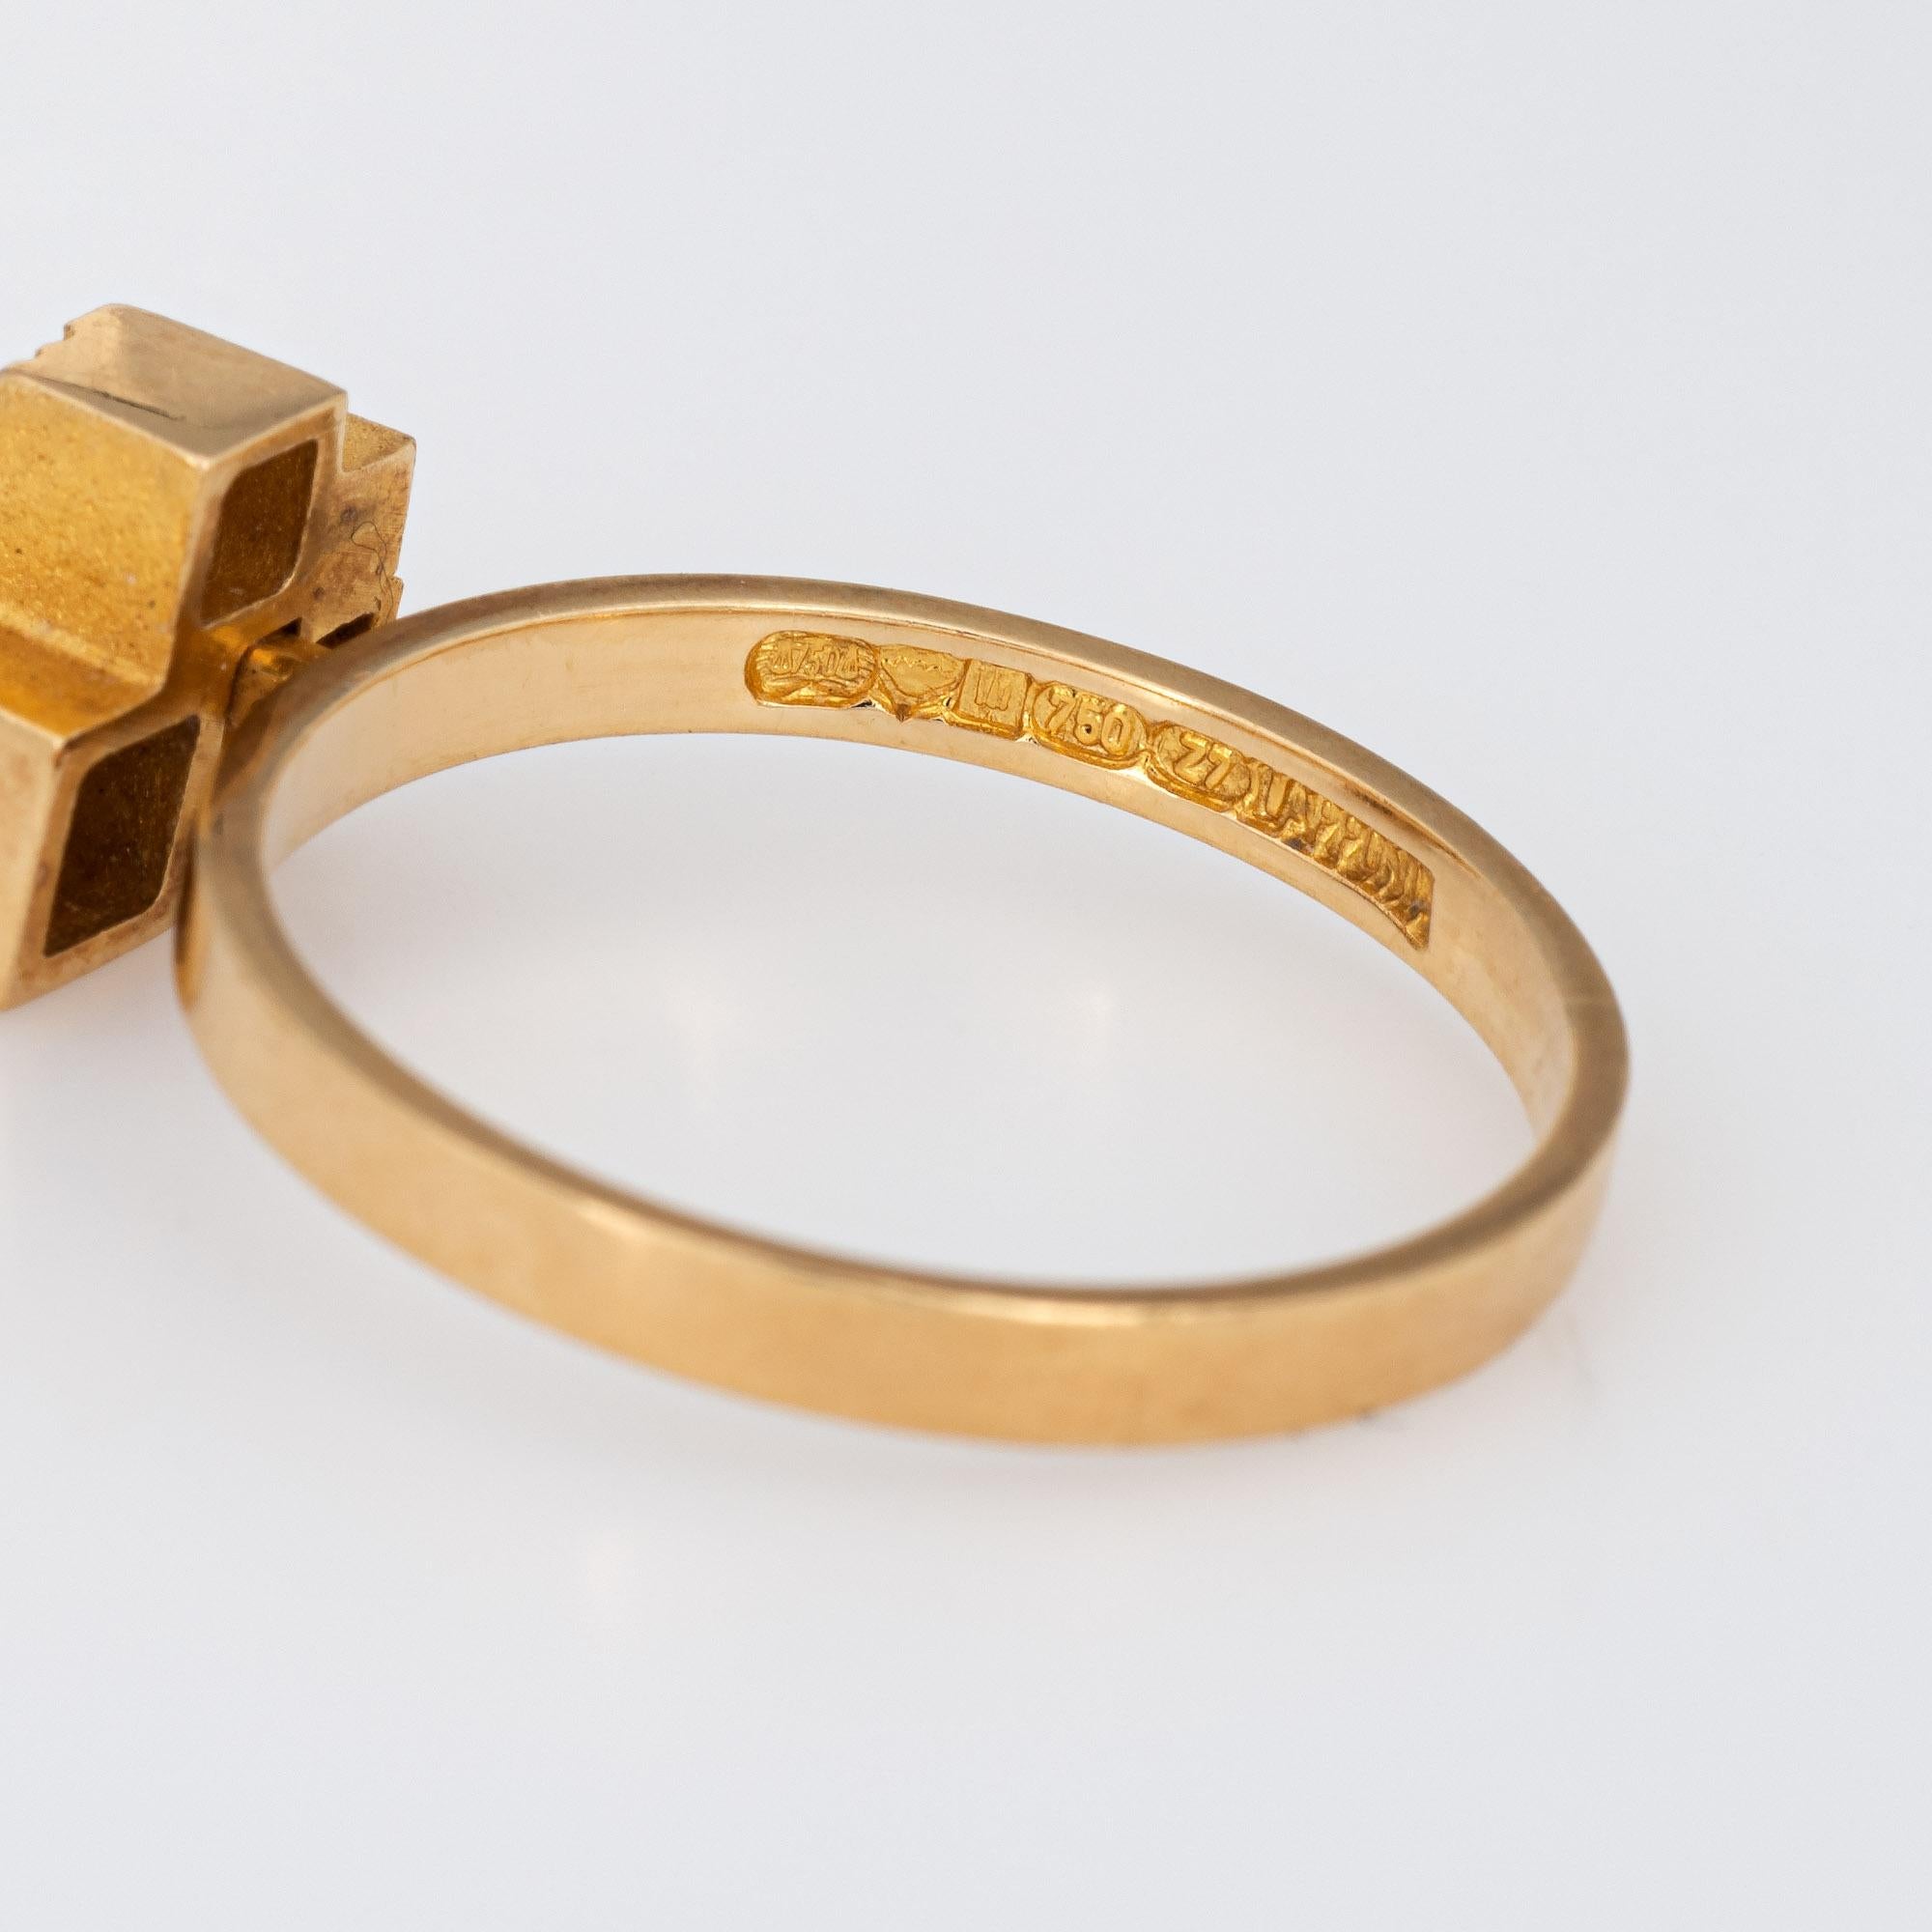 Lapponia Cube Ring Vintage 18k Yellow Gold Björn Weckström Finland Jewelry 6.25 In Good Condition For Sale In Torrance, CA